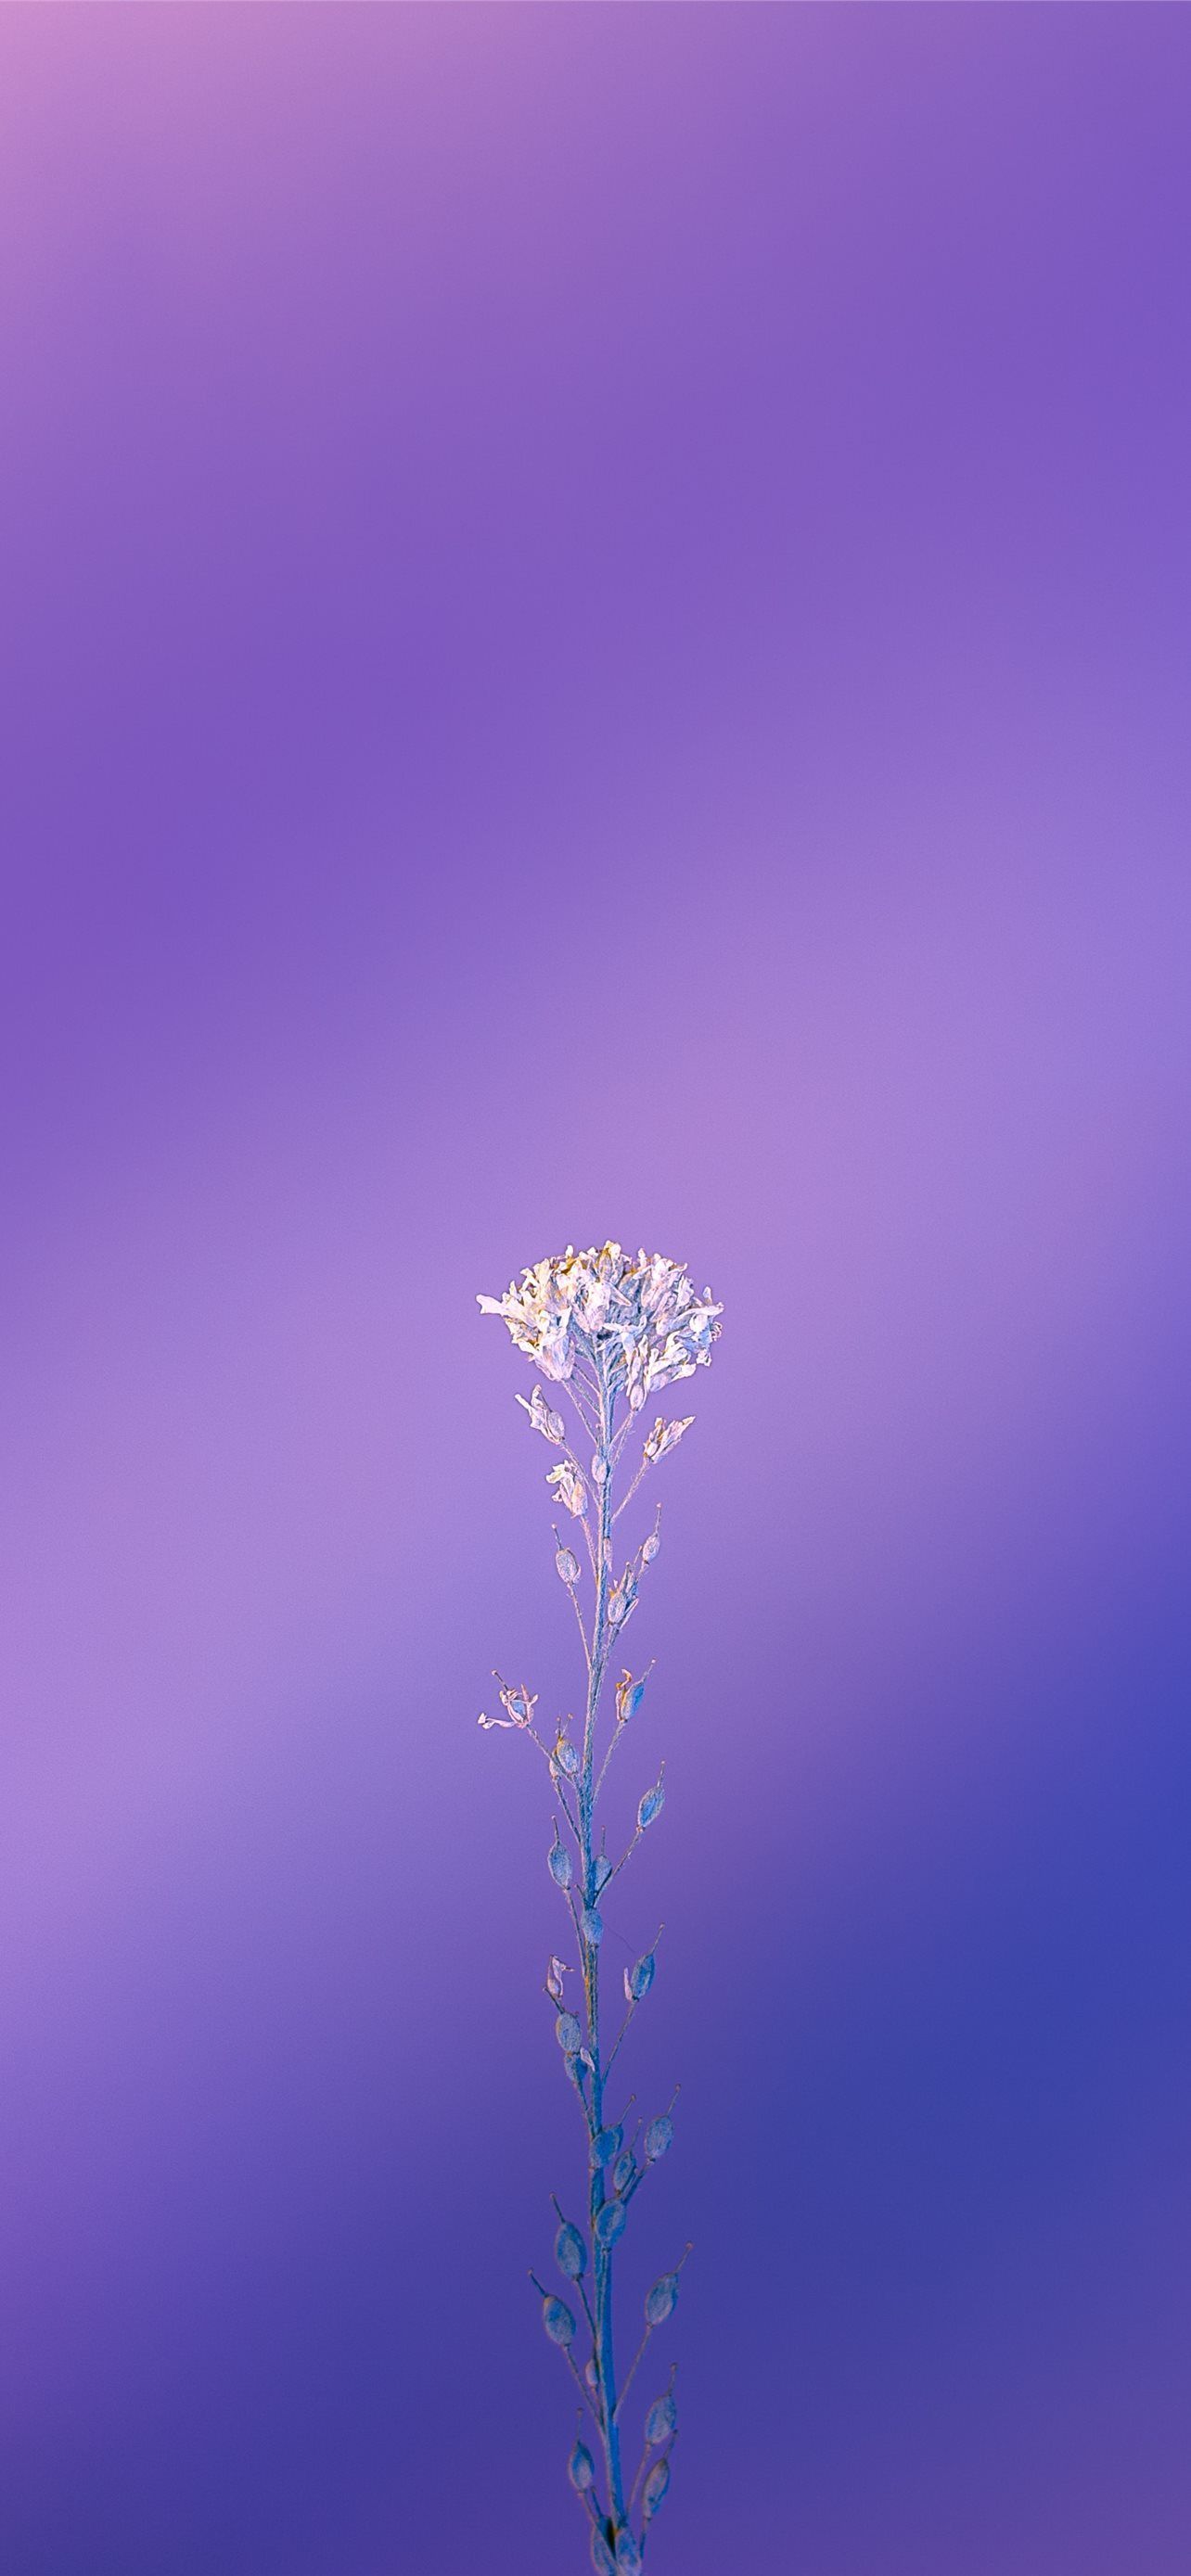 A flower is in the middle of an image - Indigo